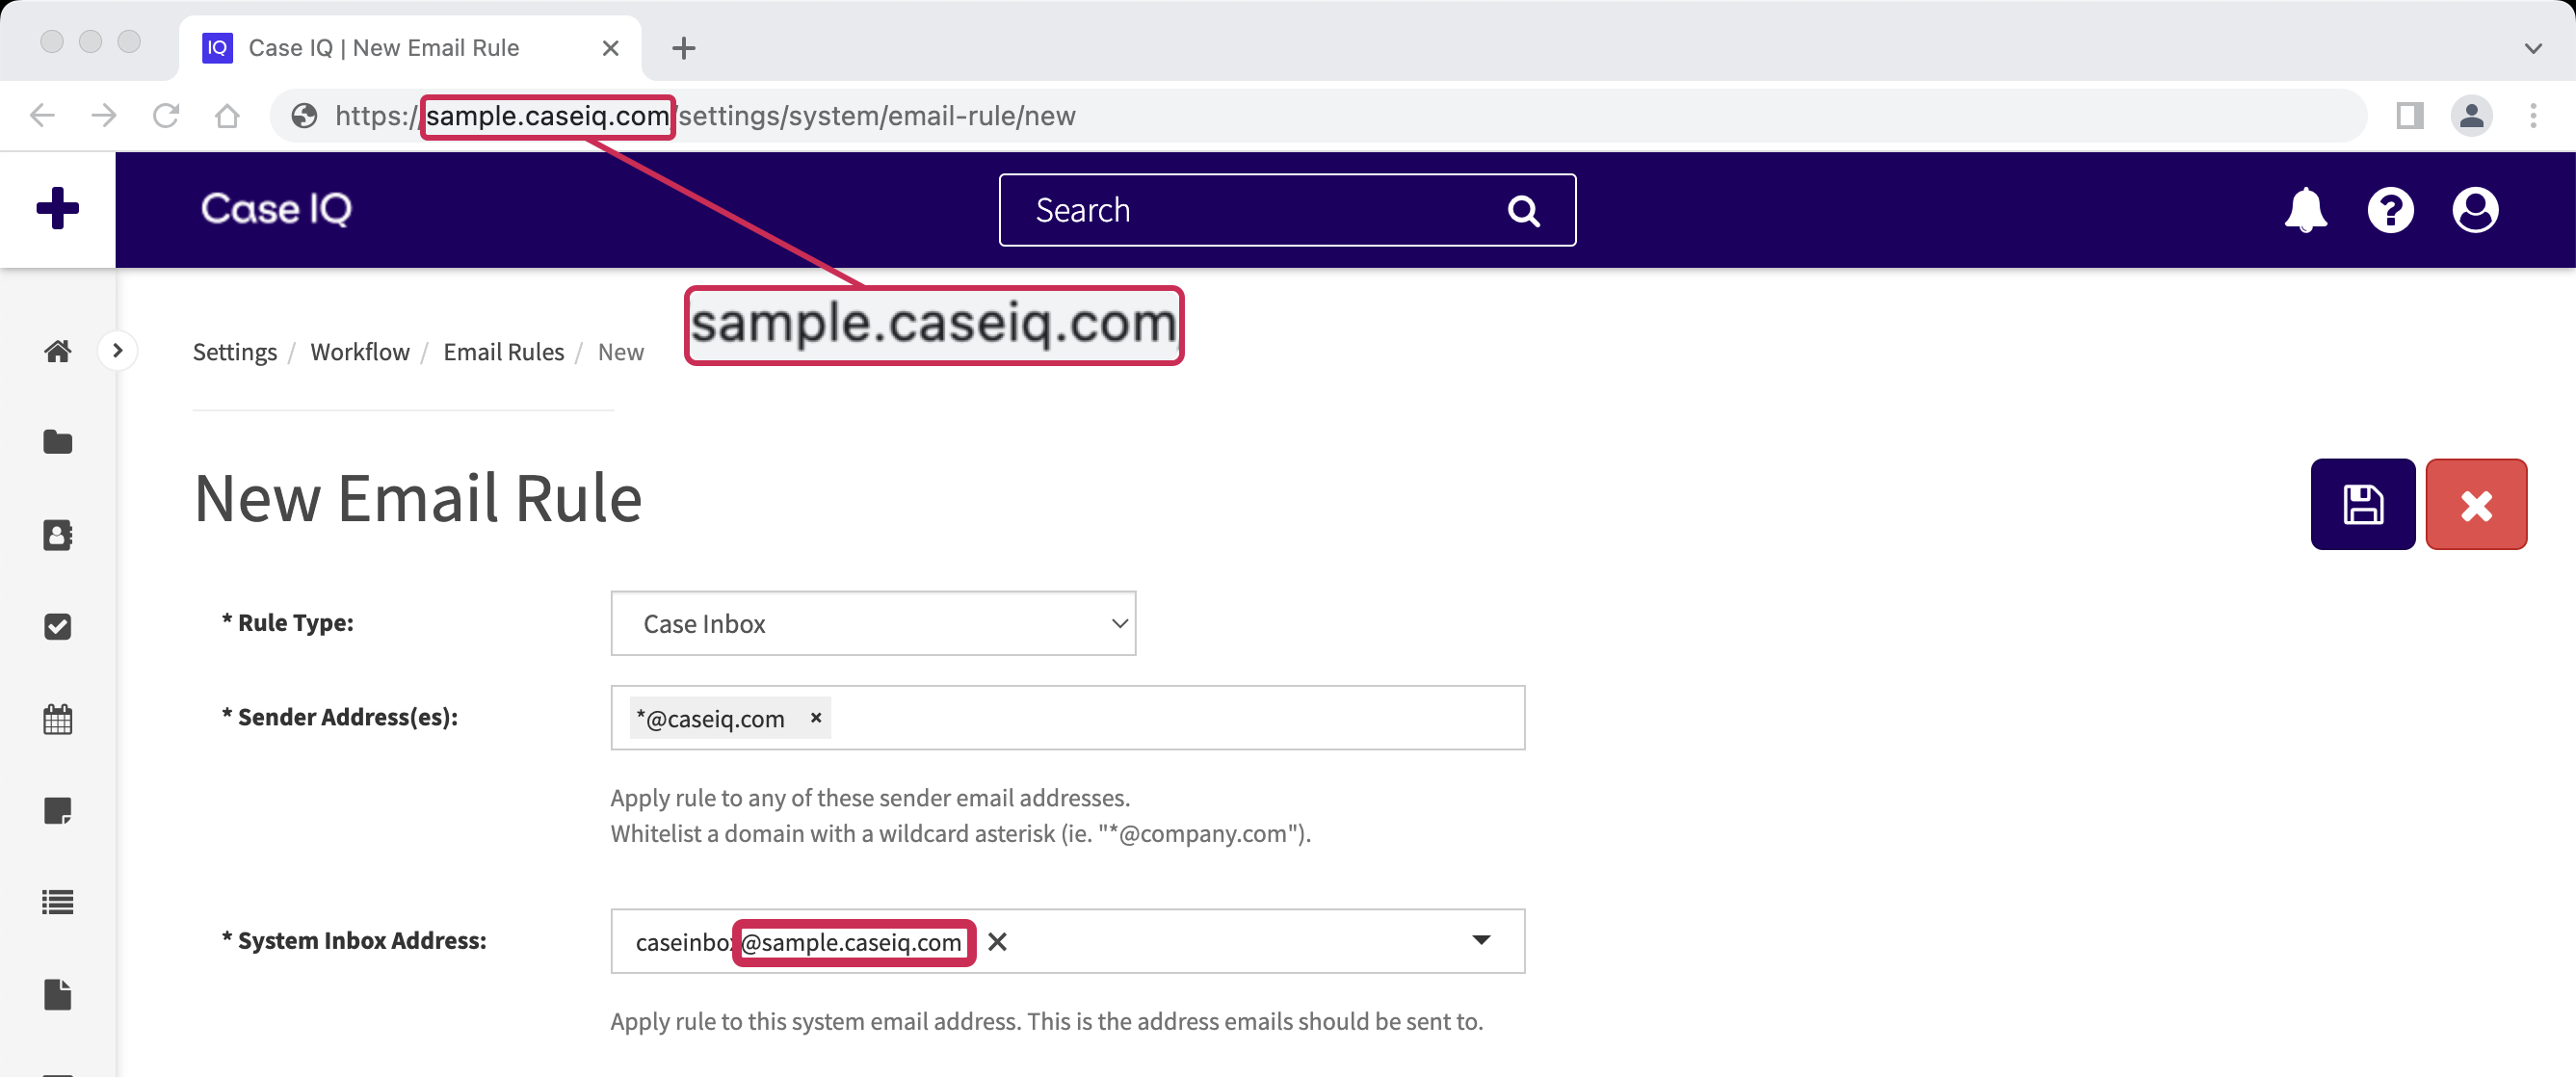 The following text is highlighted in the URL bar and System Inbox Address field: "sample.caseiq.com".